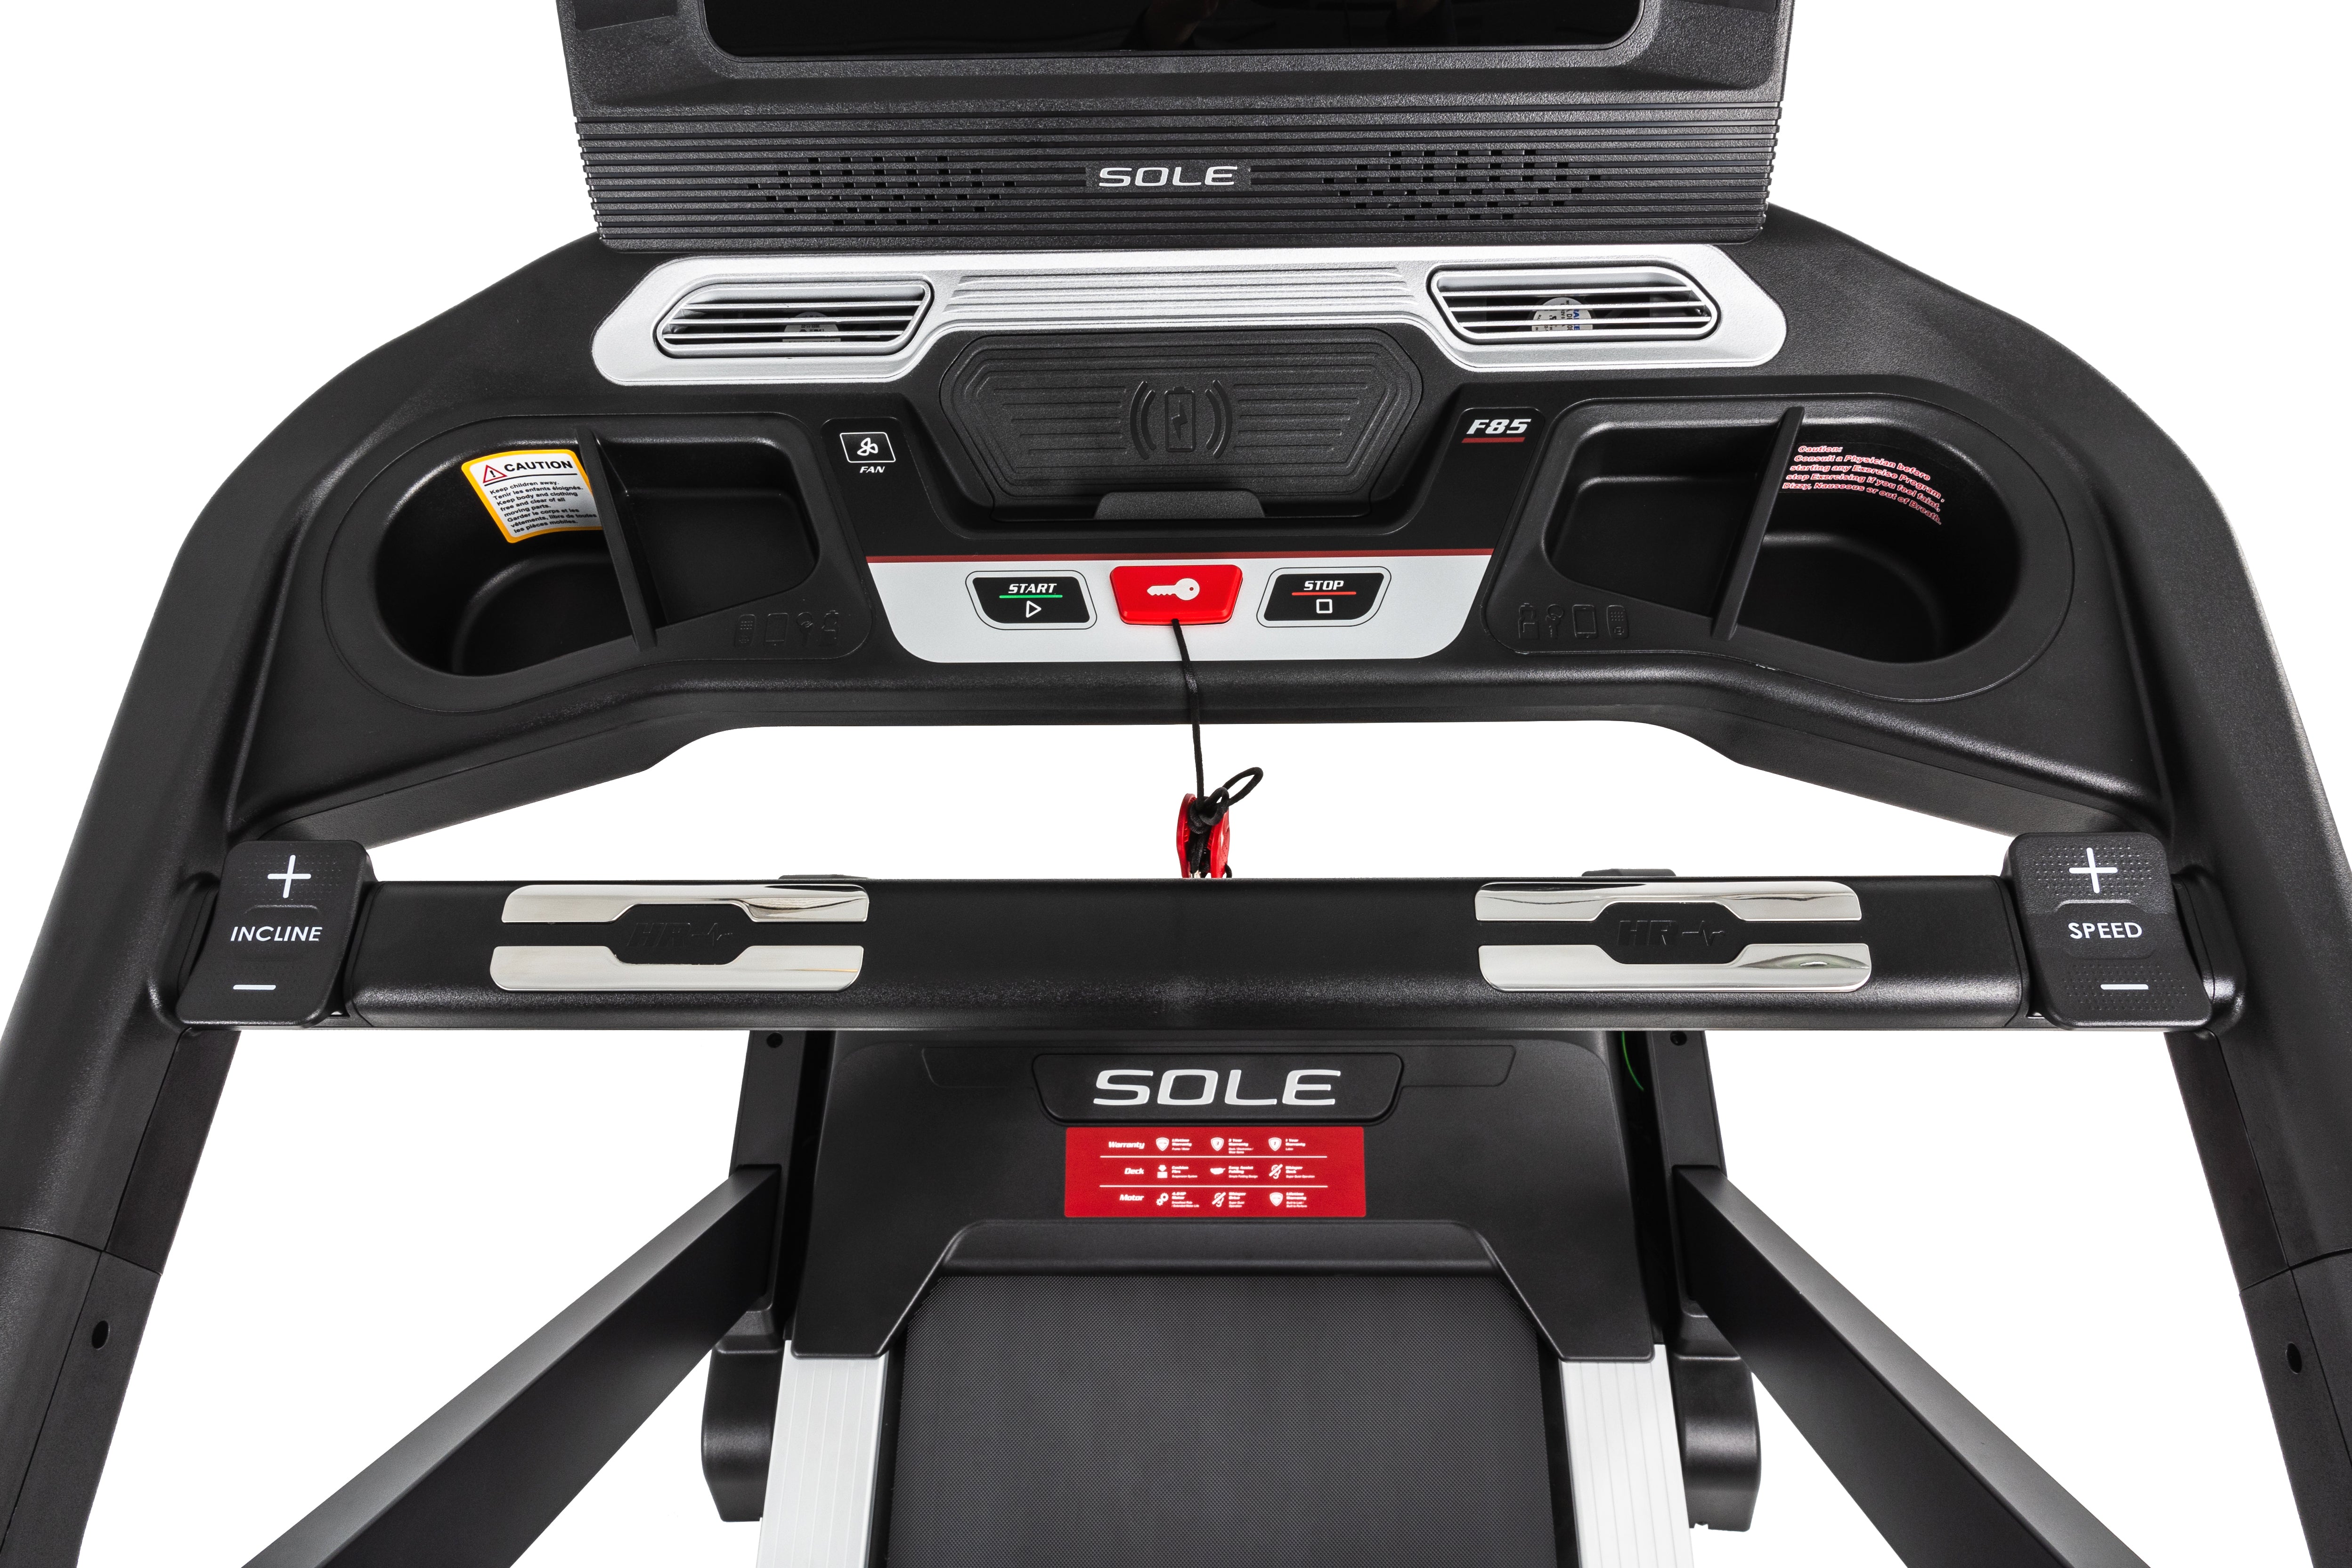 Overhead view of the Sole F85 treadmill console featuring a central digital display with F85 labeling, start and stop buttons, a wireless charging pad with logo, dual cup holders, incline and speed adjustment arms on either side, and the SOLE logo prominently displayed on the lower front panel.